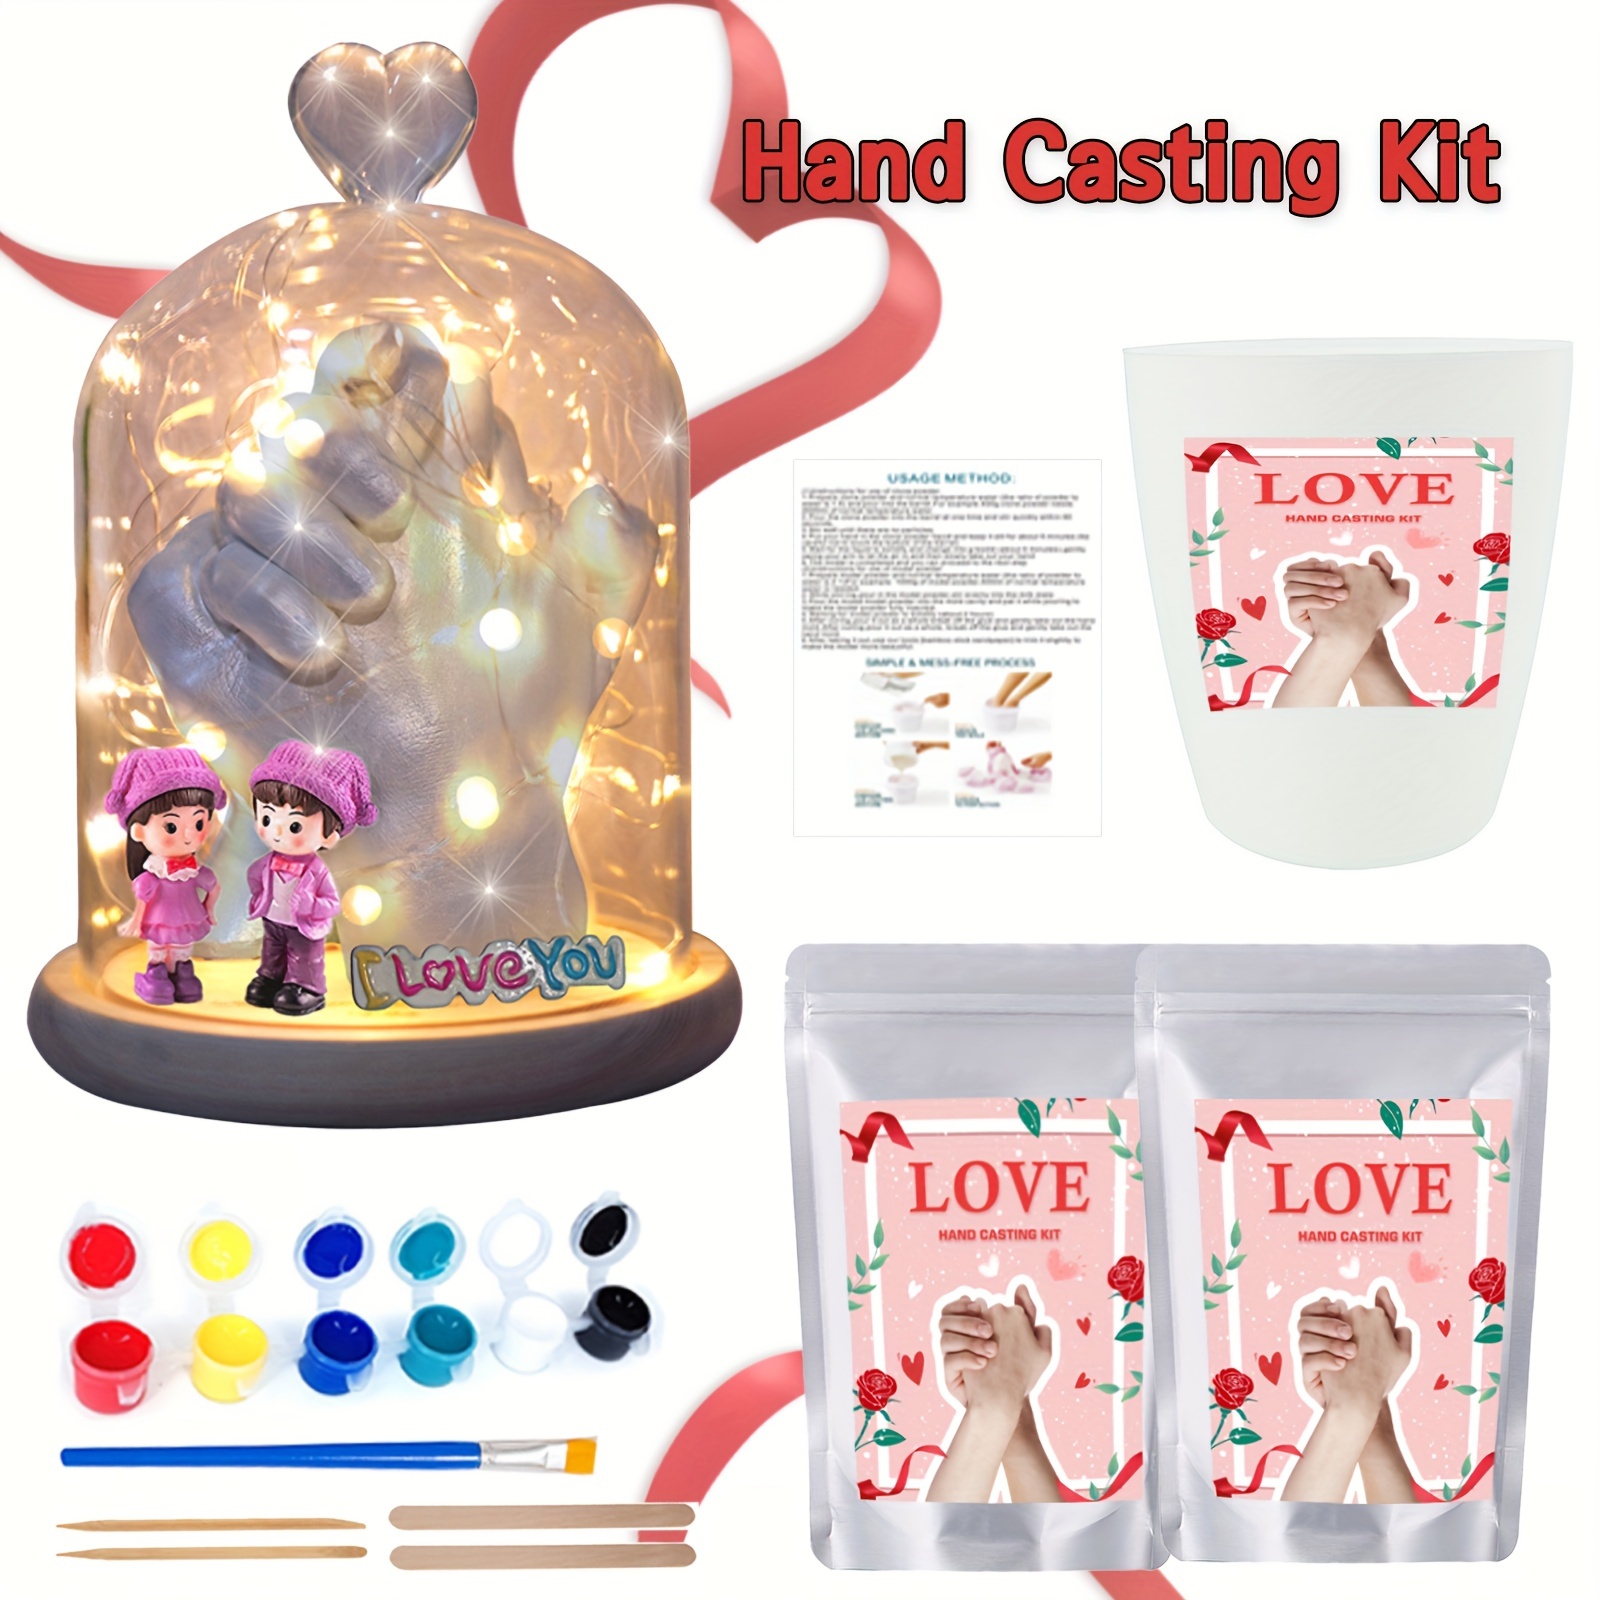 Plaster Hand Mold Casting Kit – “Happy Hands” 2 Person Plaster